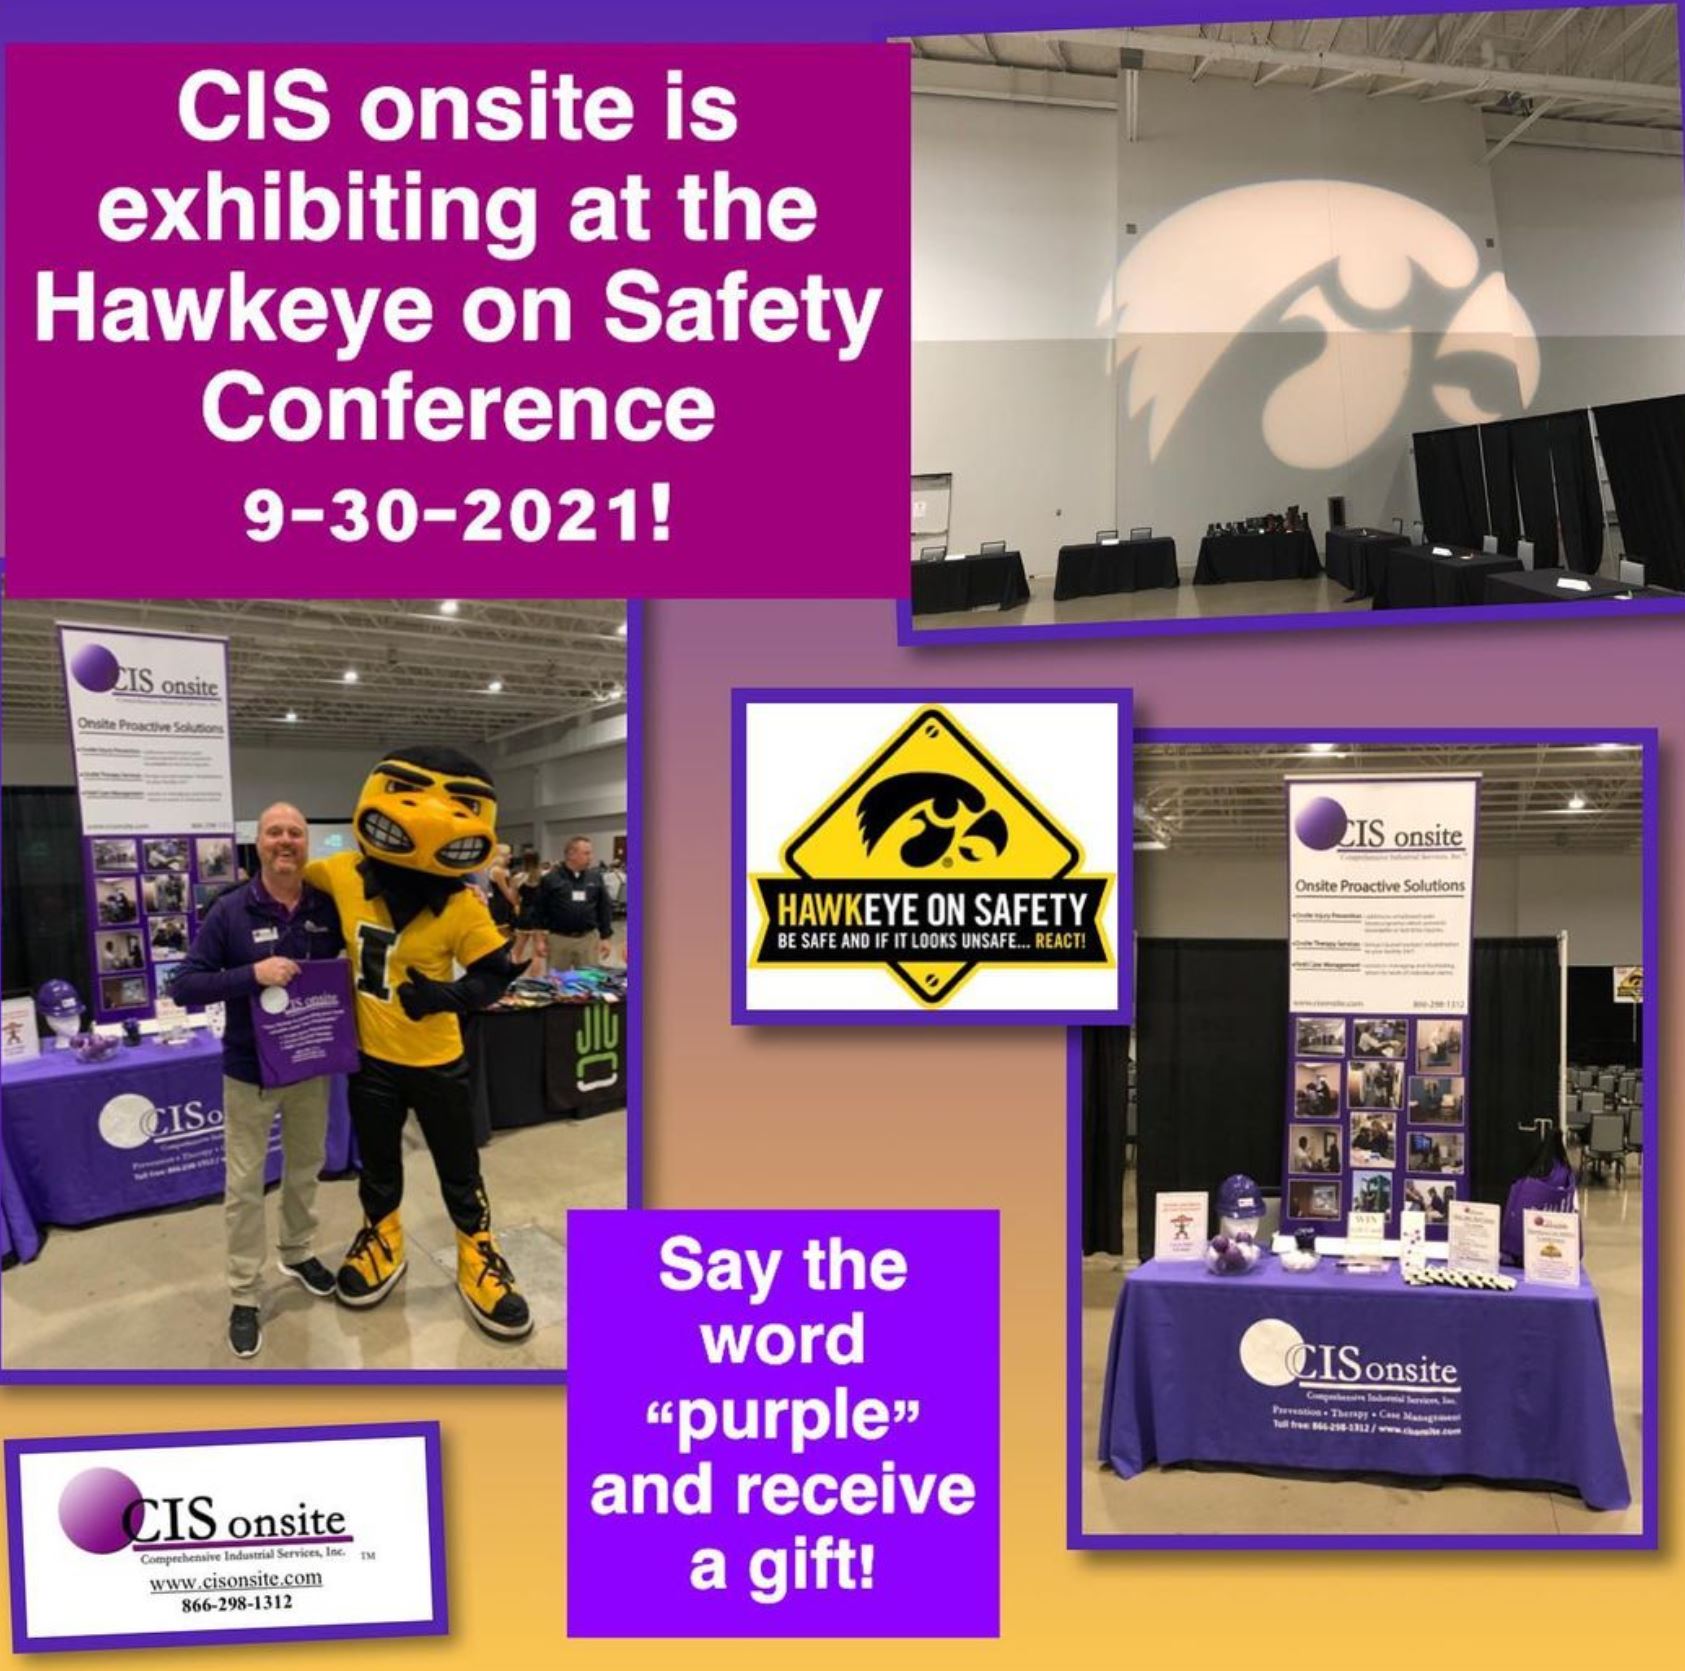 Hawkeye on Safety Conference 2021